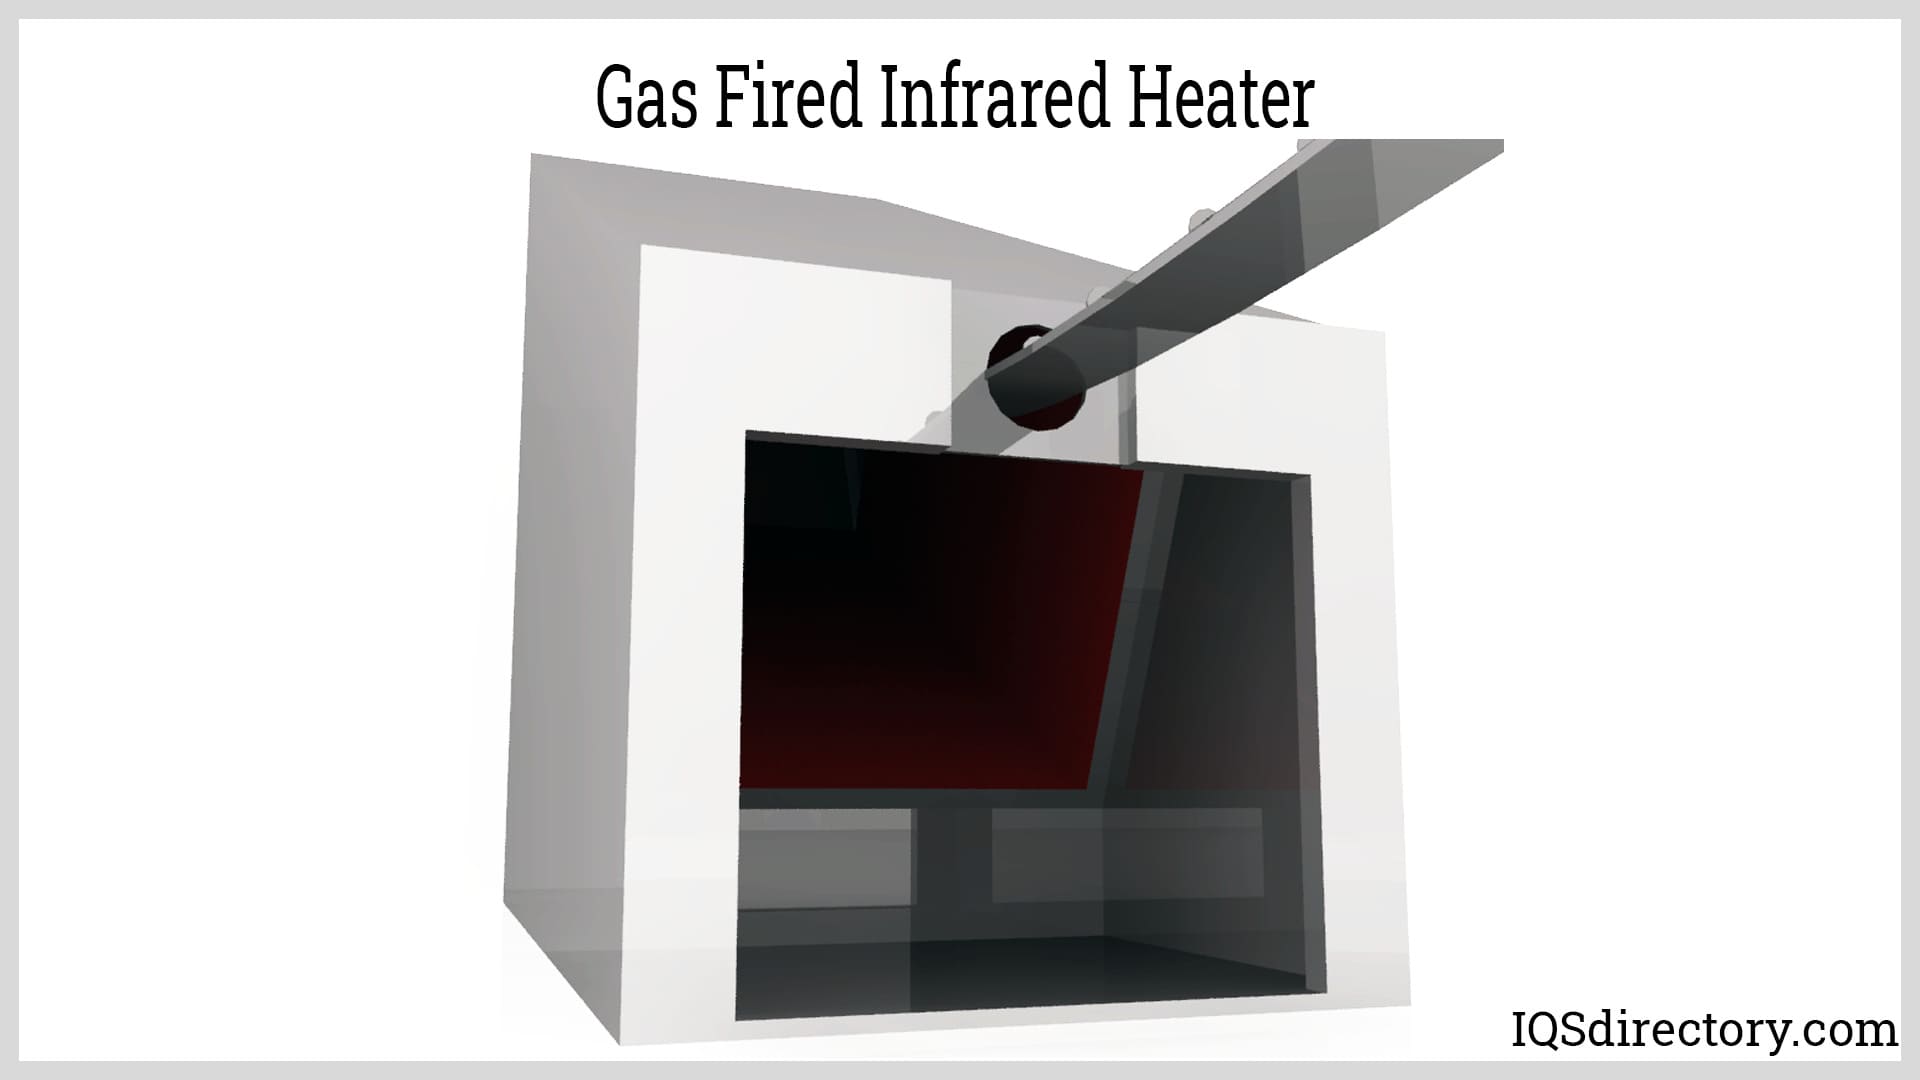 Gas Fired Infrared Heater